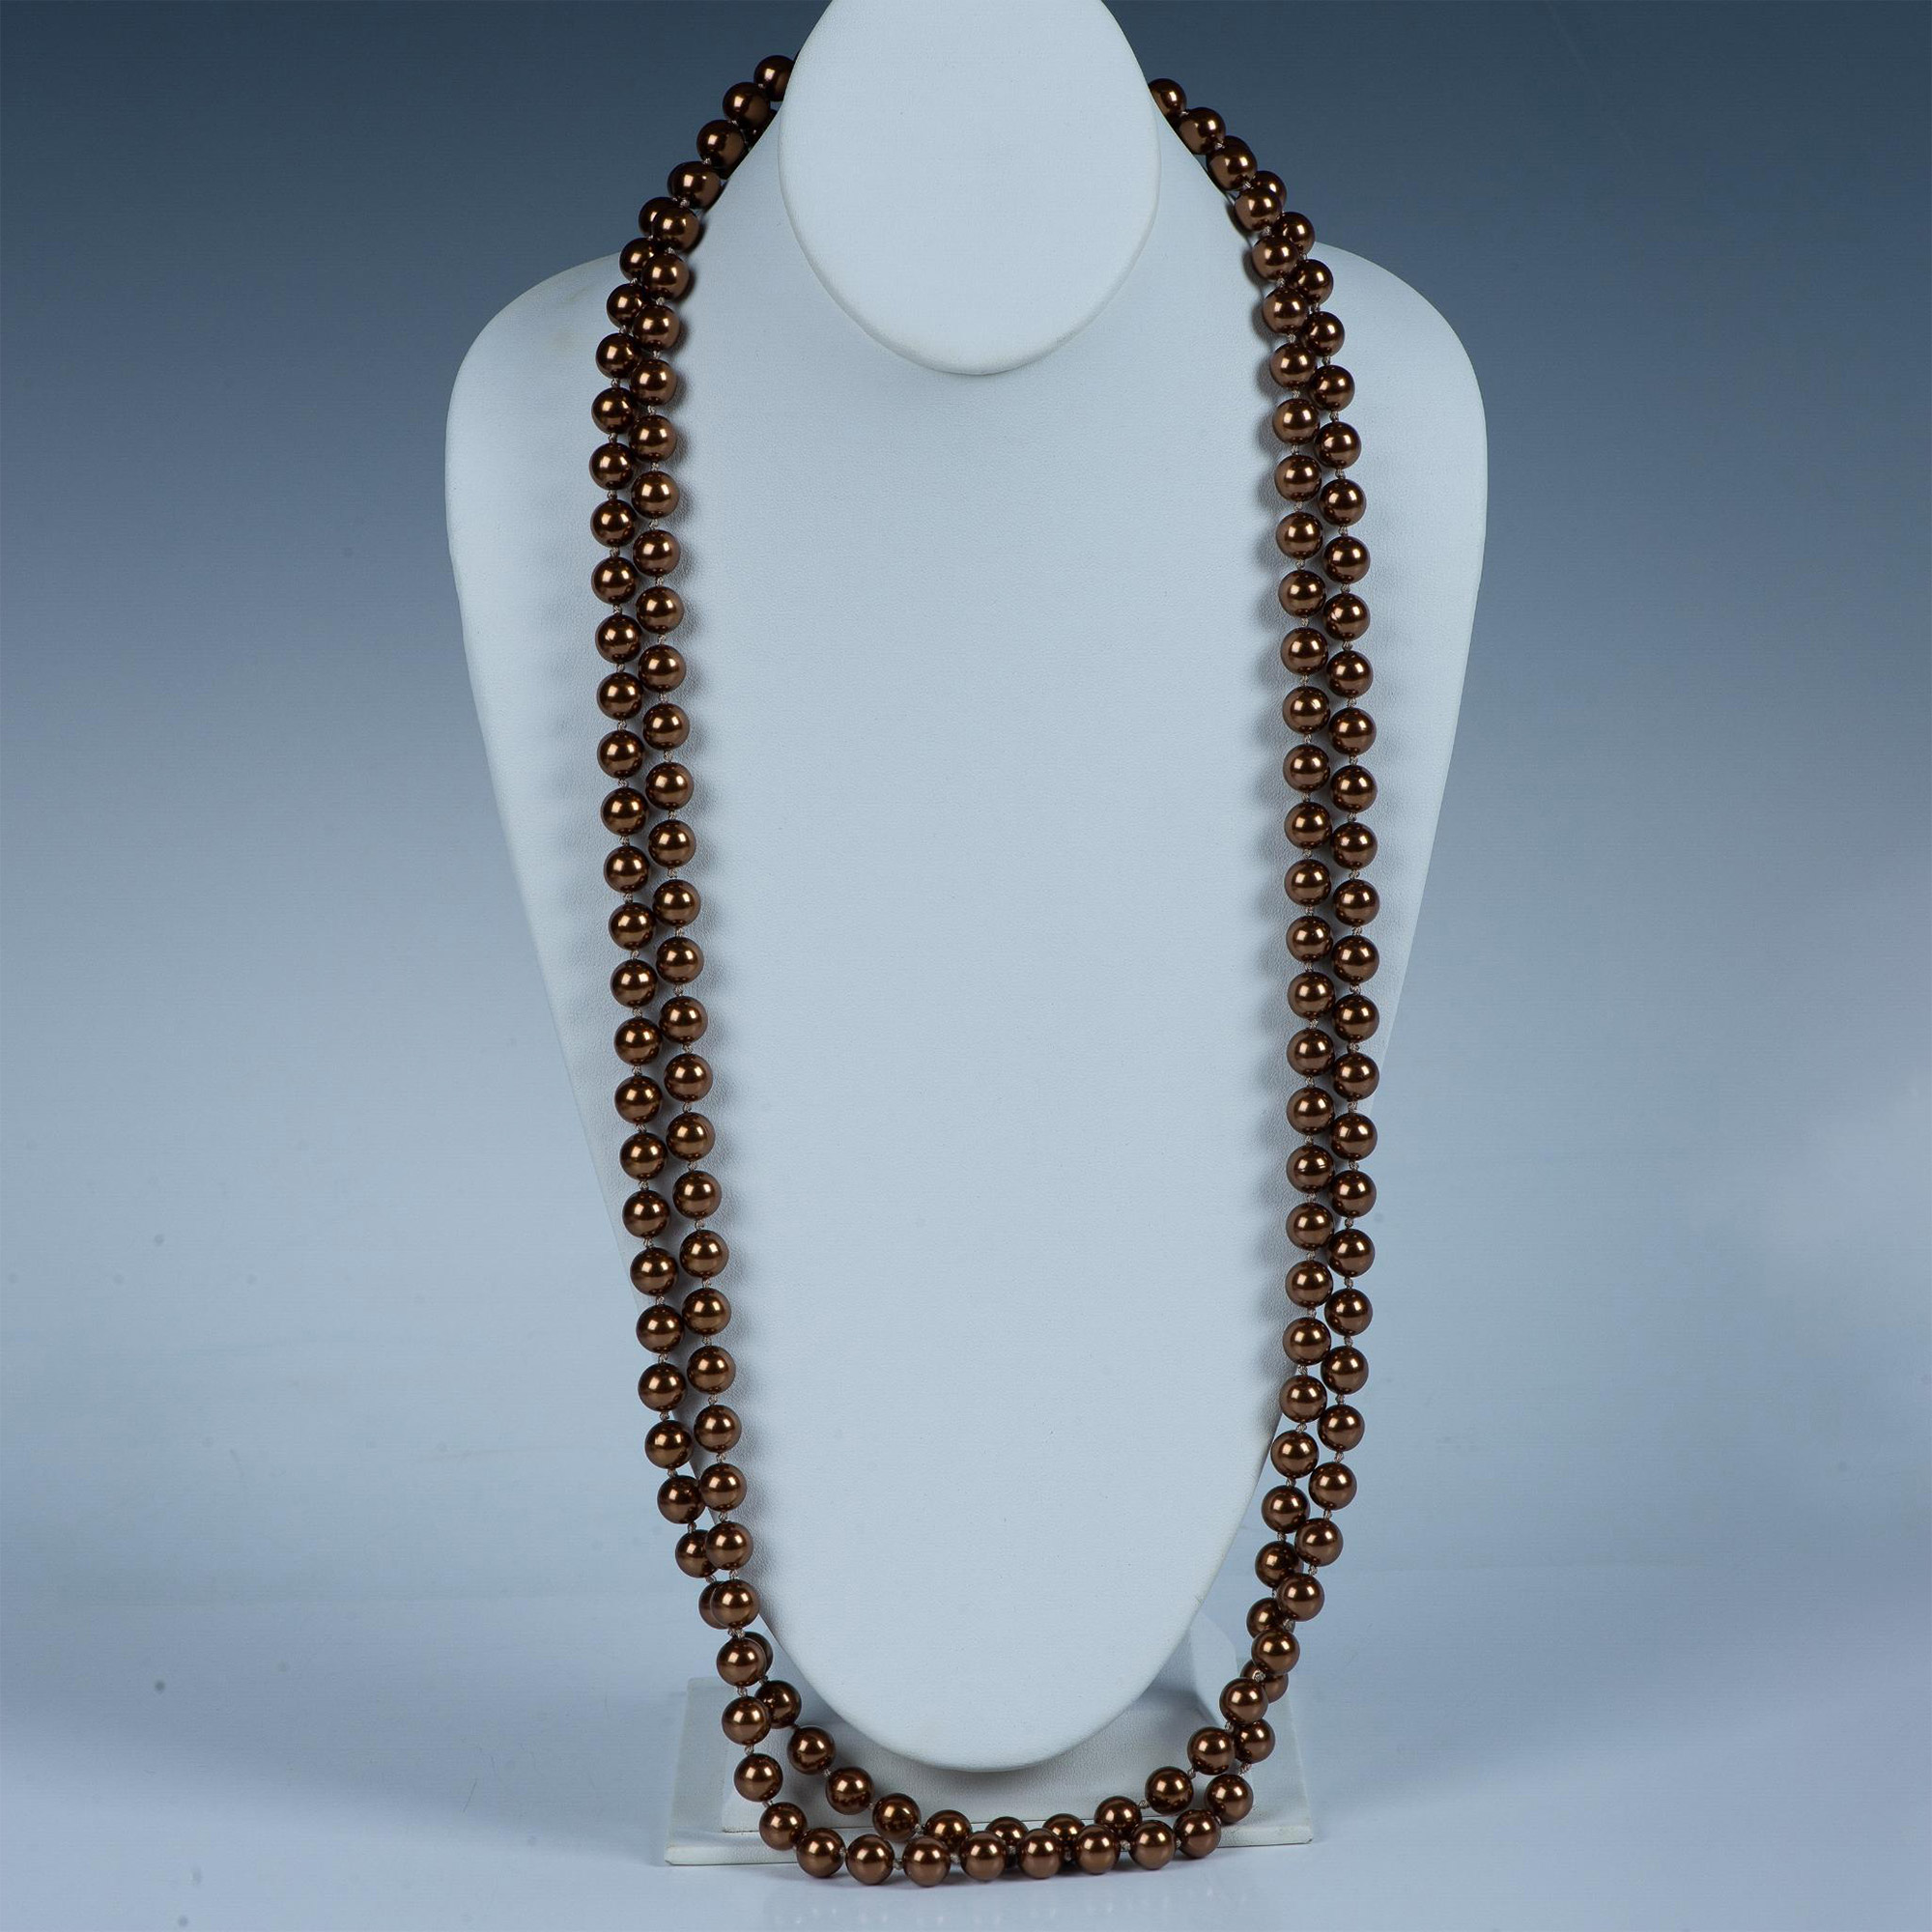 3pc Carolee Bronze Faux Pearl Necklace and Earrings - Image 5 of 6